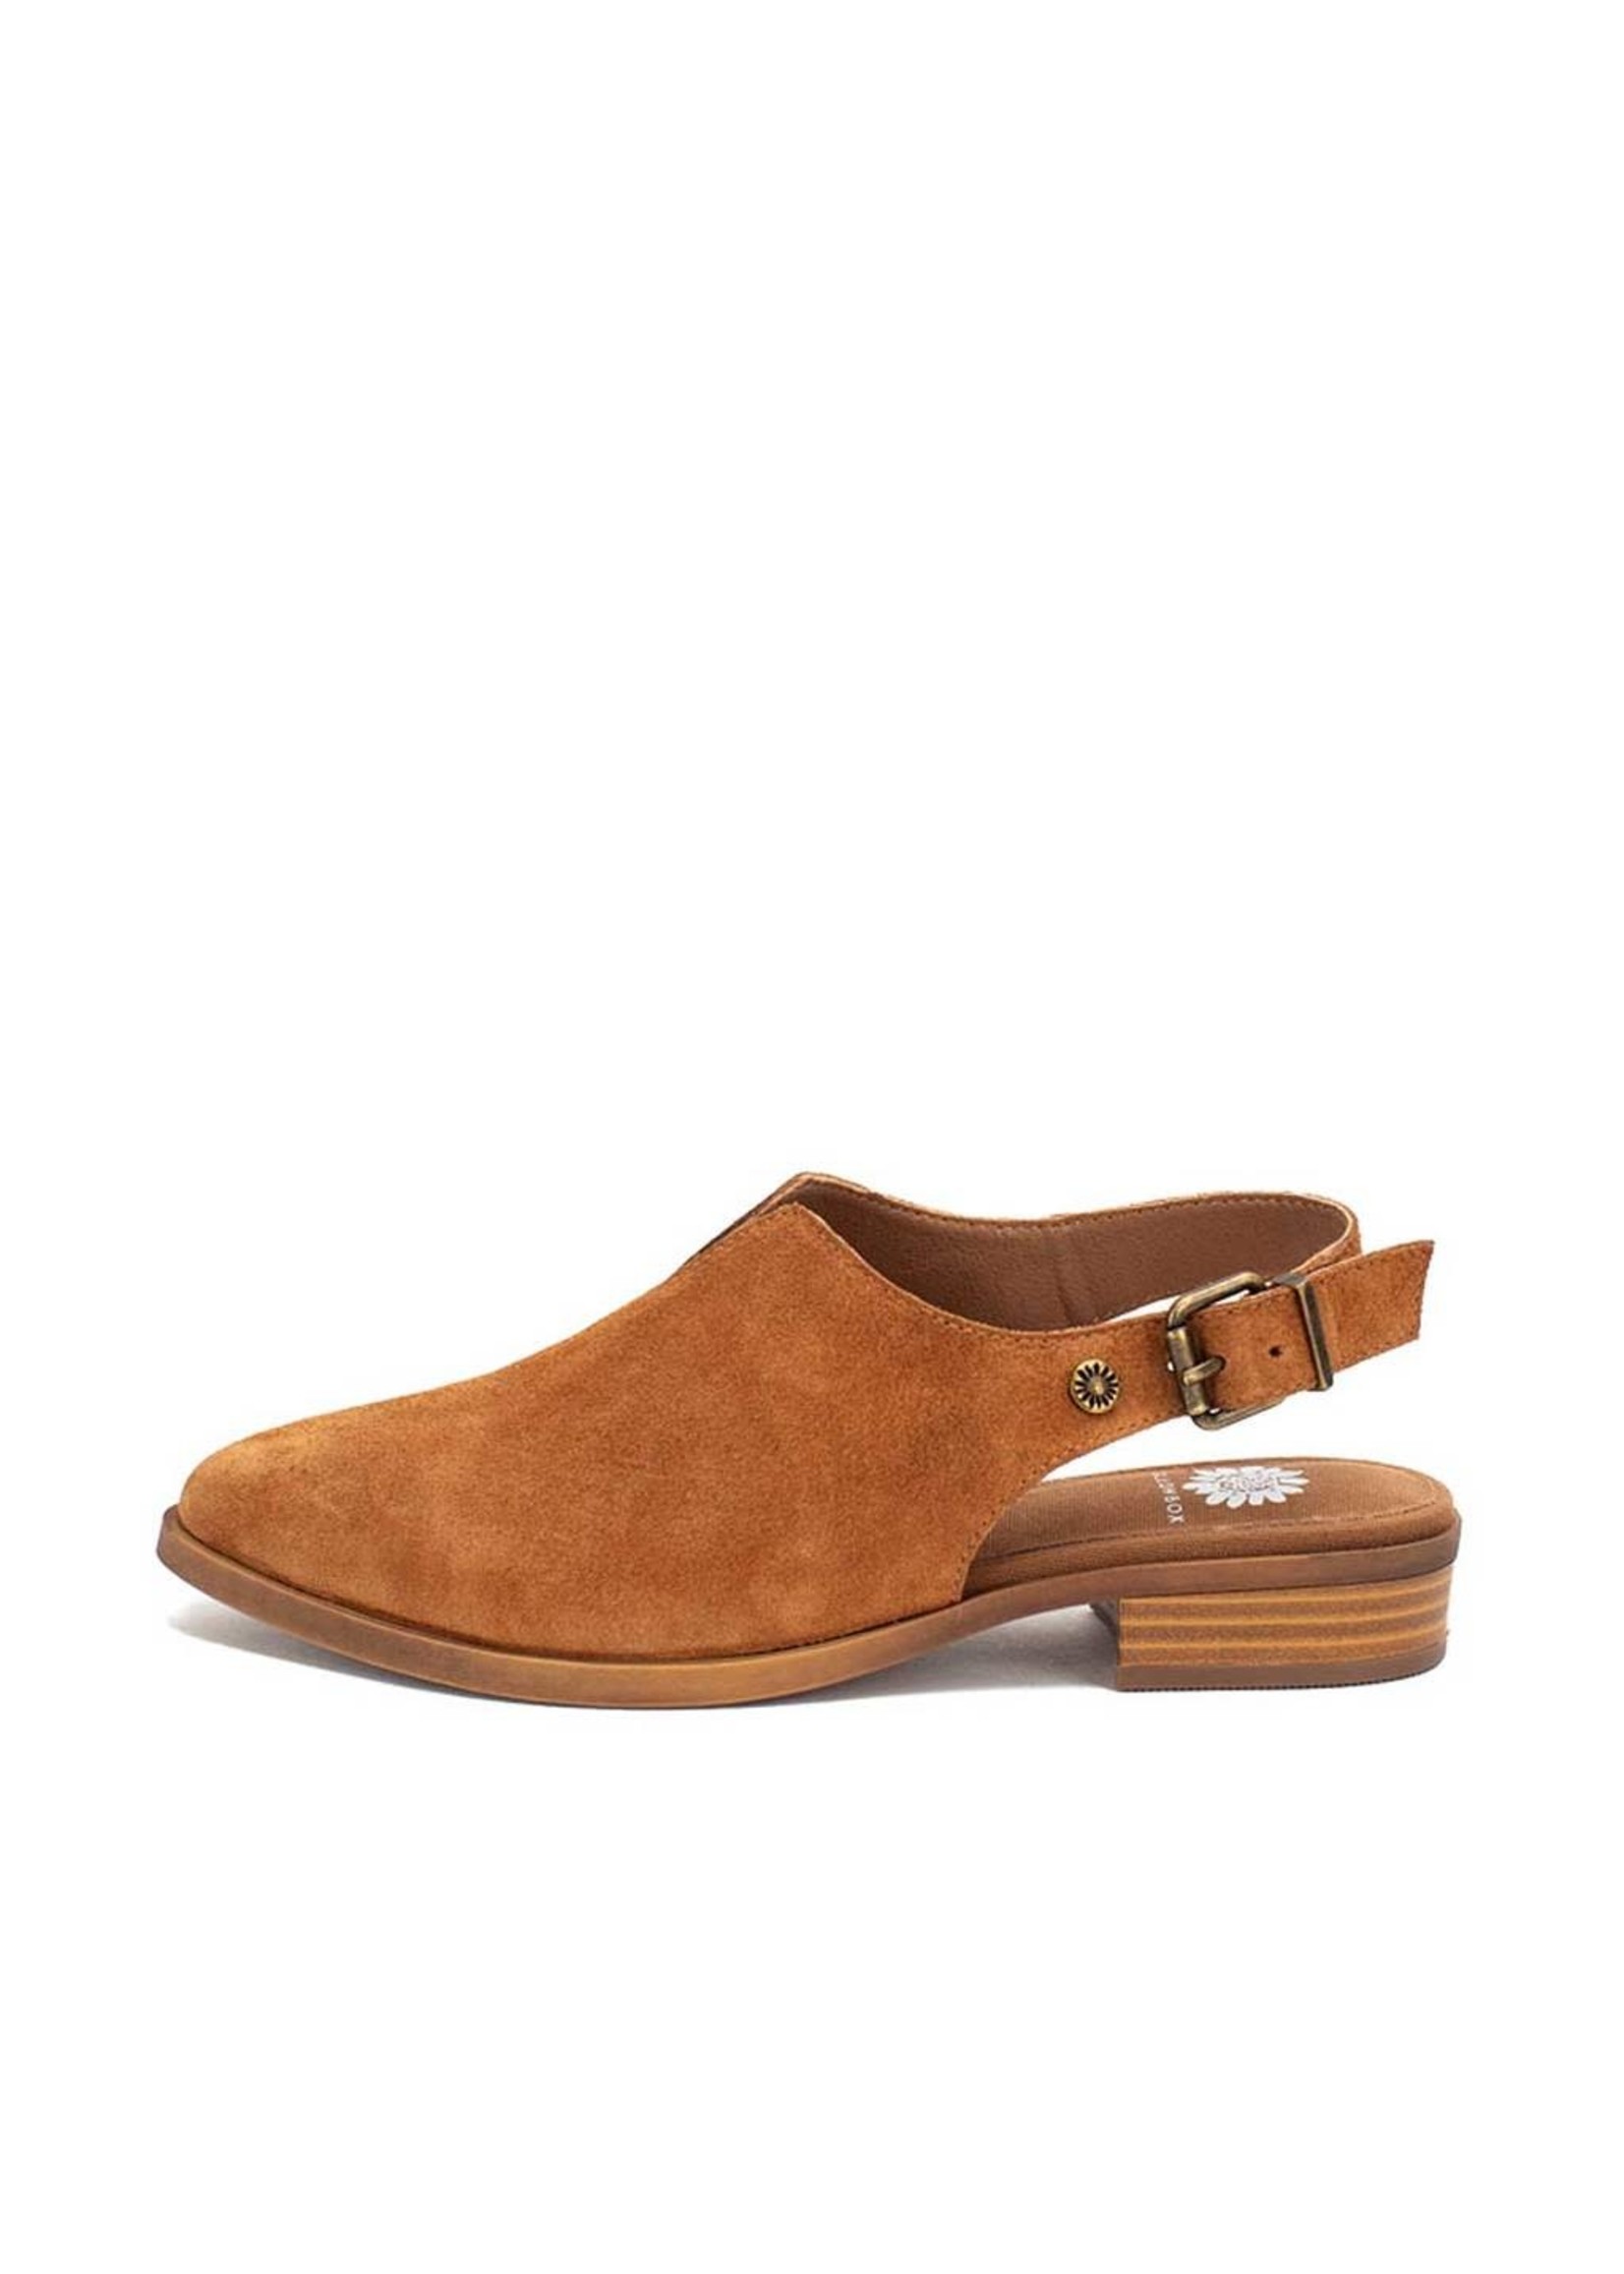 Yellow Box Shoes Freedah Toffee by Yellow Box